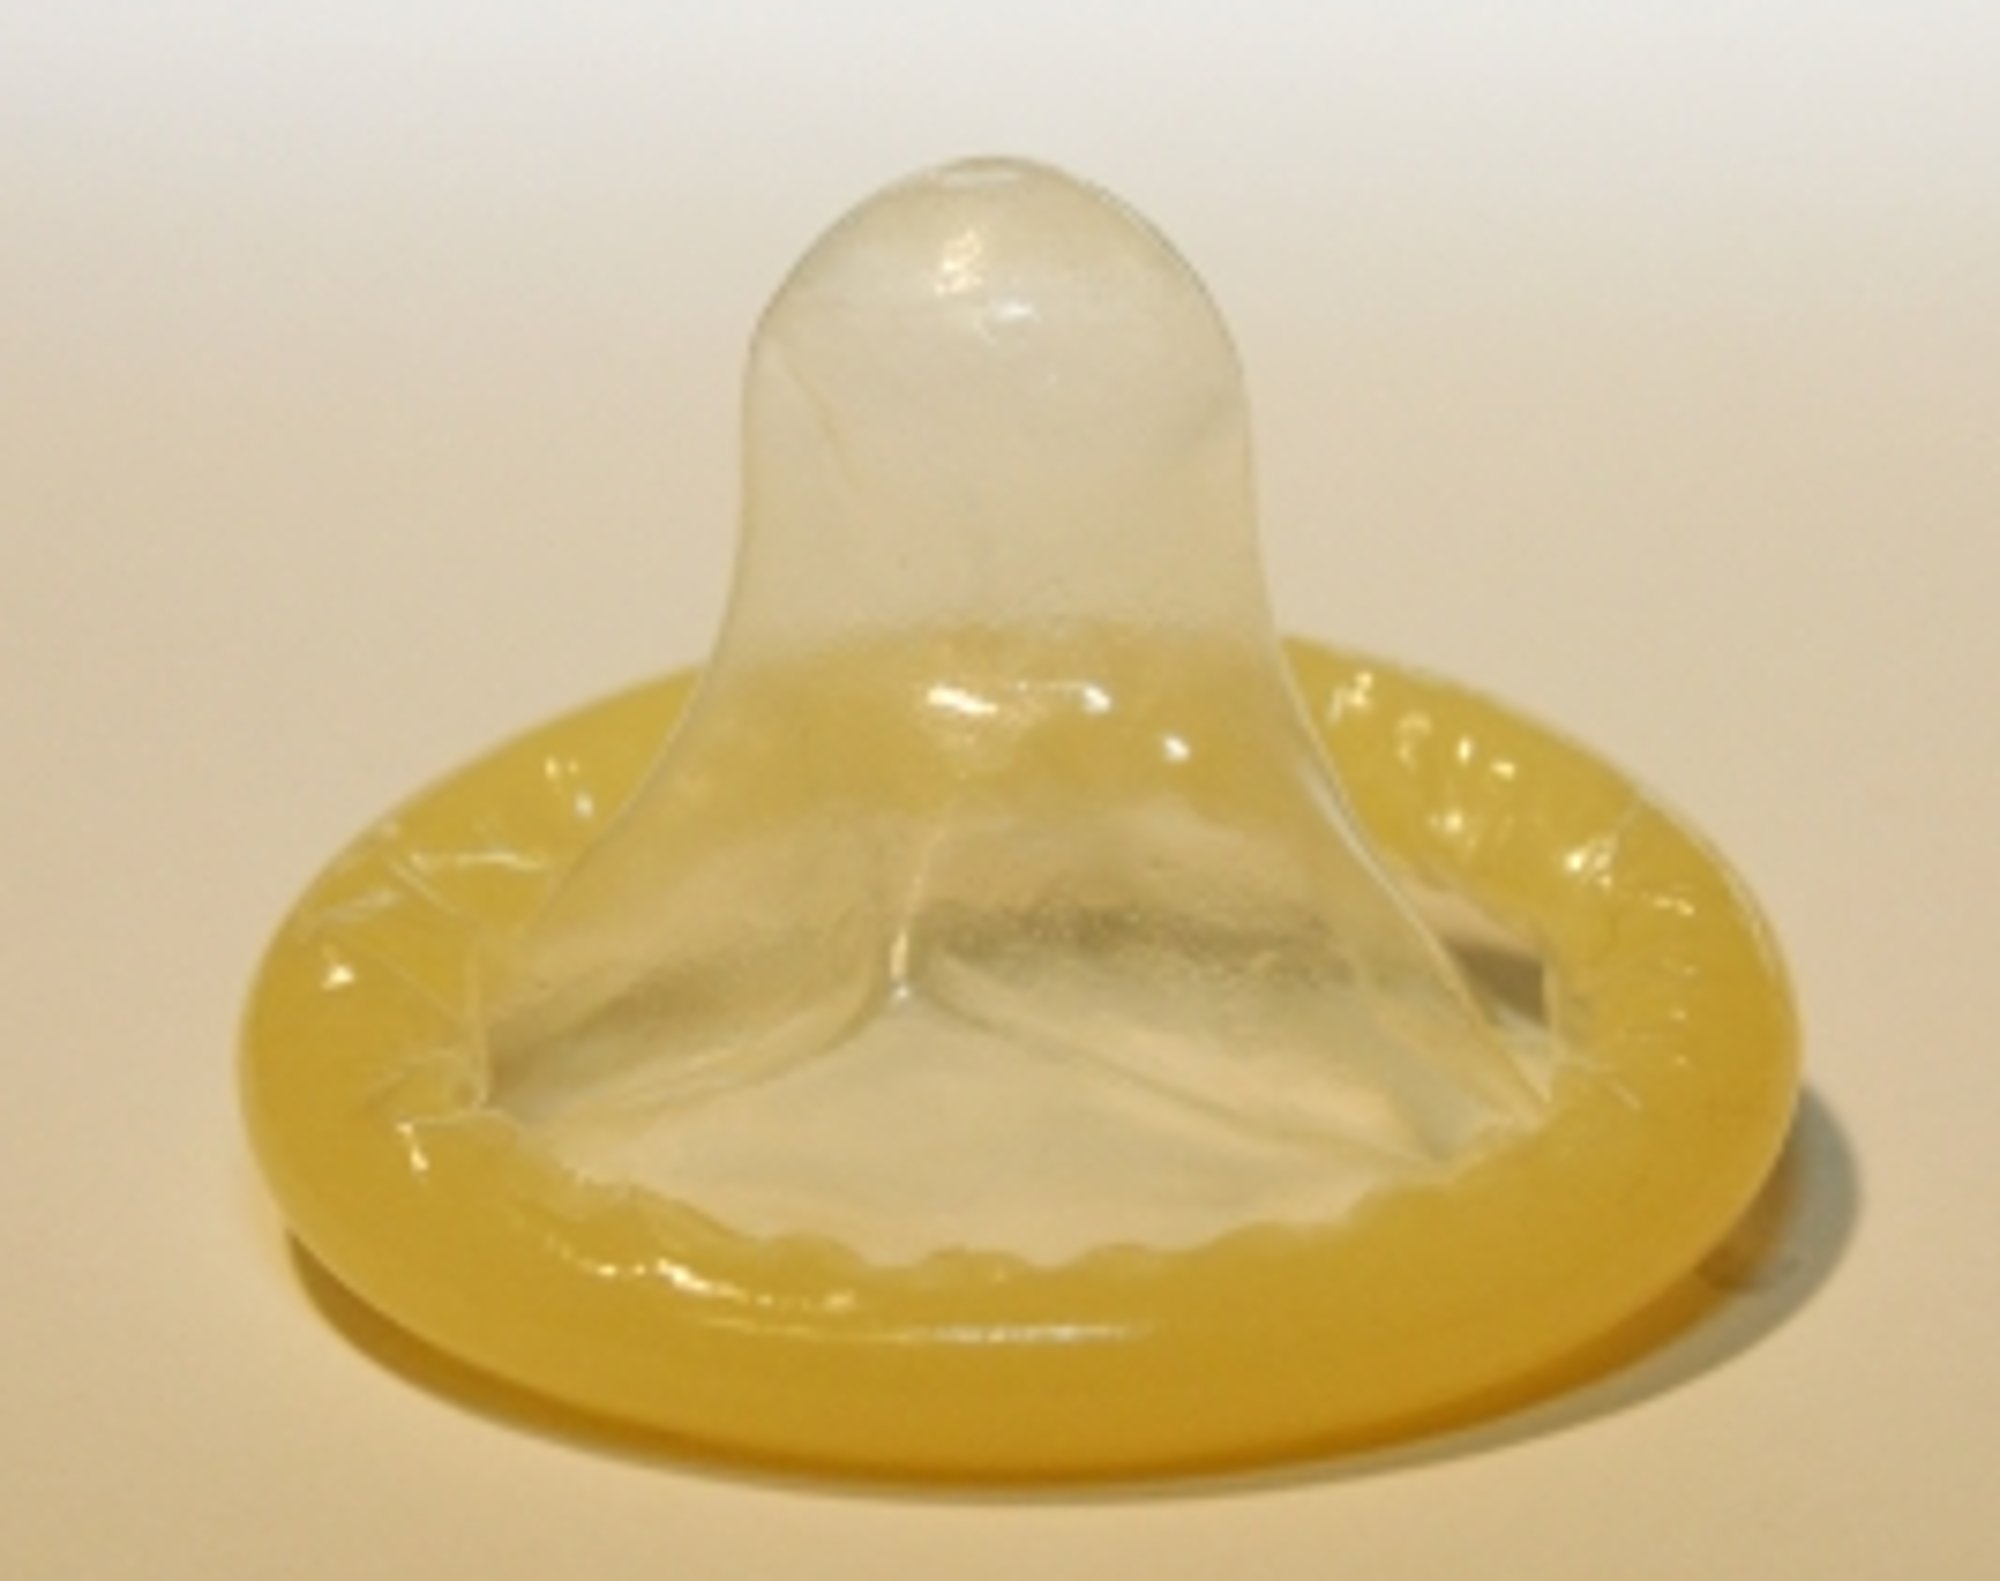 Tourists Warned To Bring Their Own Condoms During France